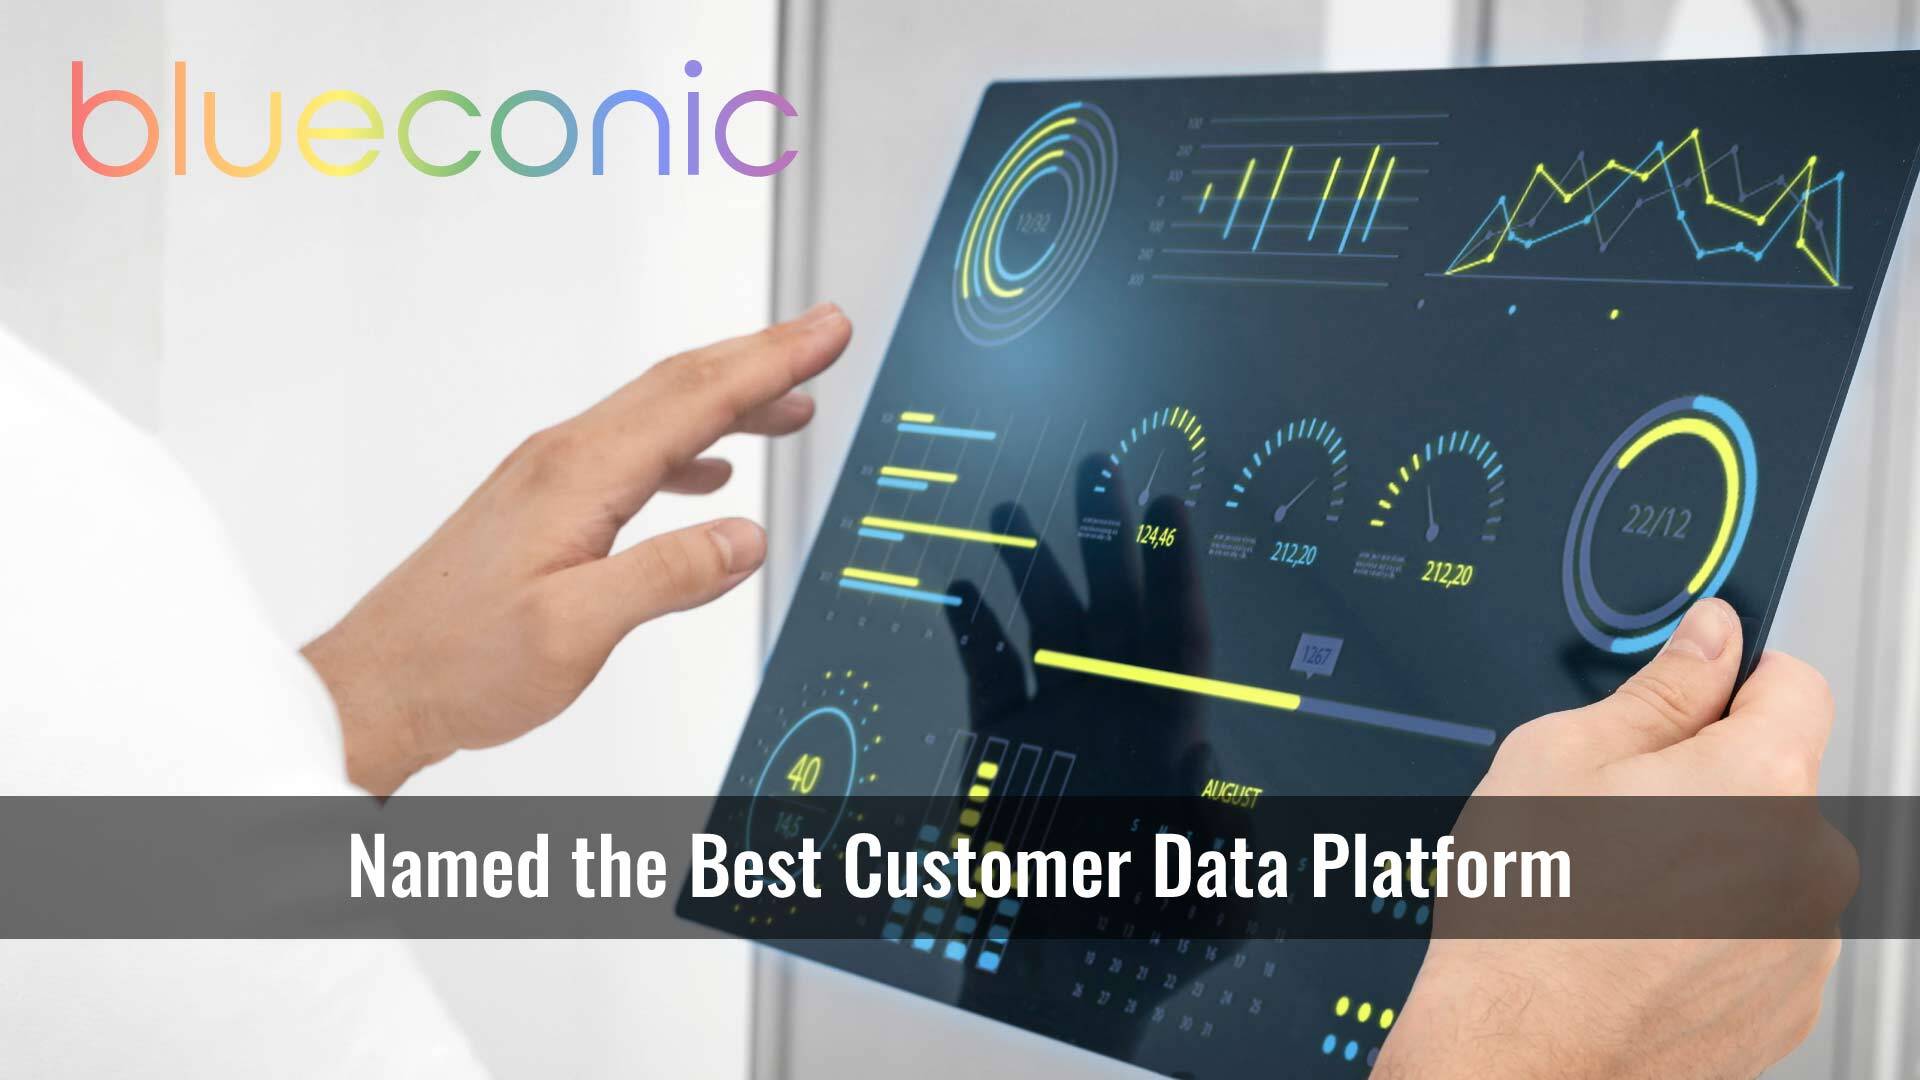 BlueConic Recognized by SIIA as Best Customer Data Platform for Second Consecutive Year